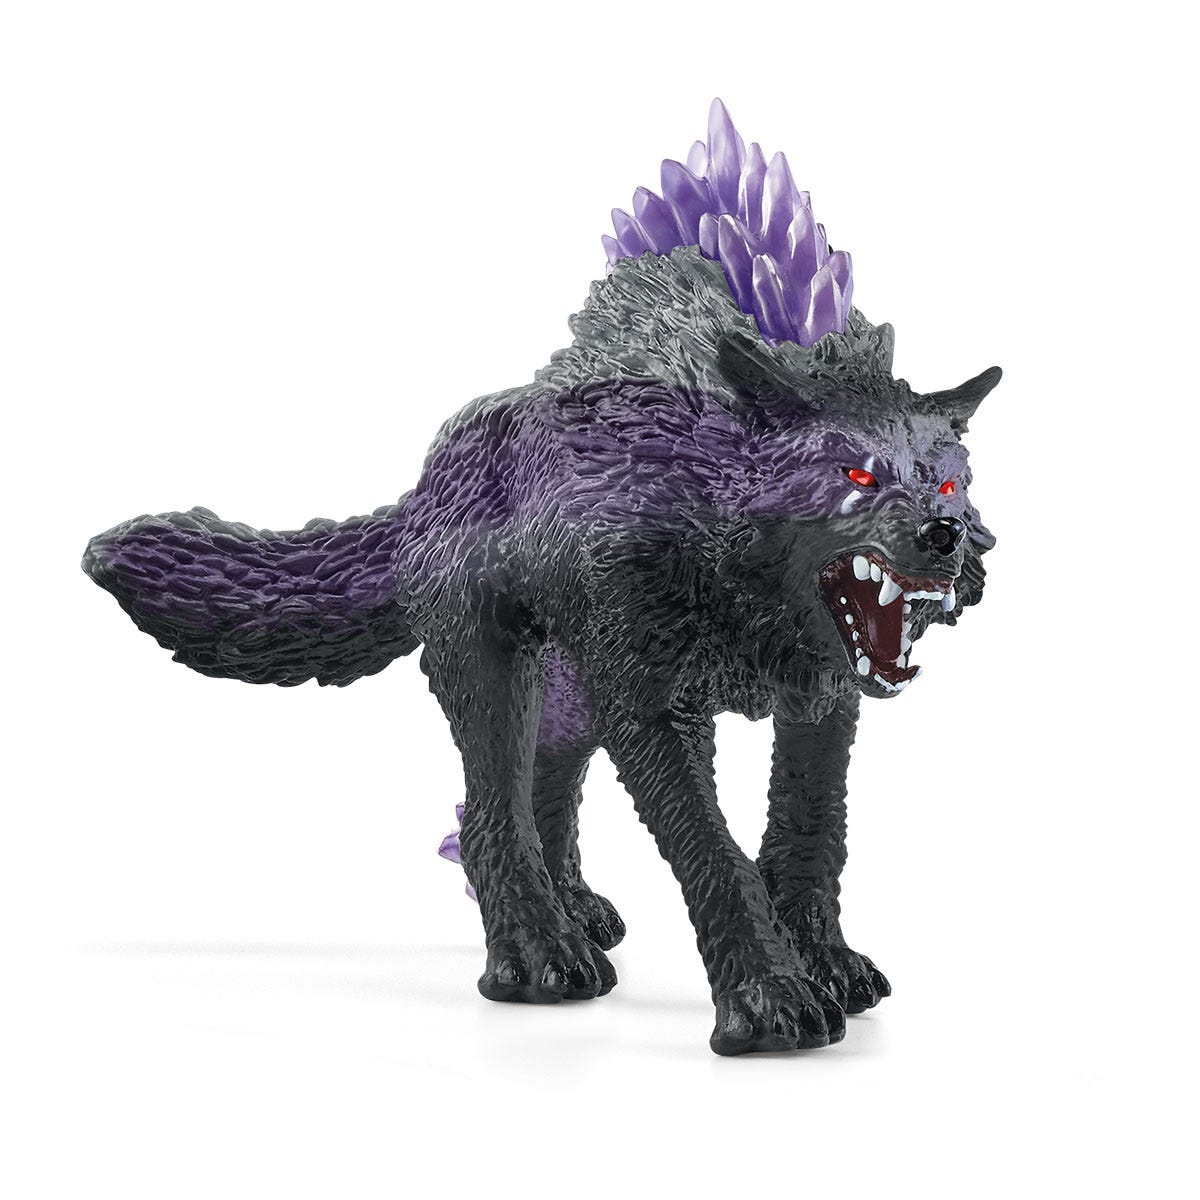  Schleich Wild Life Realistic Prowling Black Panther Figure -  Jungle Animal Figure for Kids, Perfect Durable Toy for Fun and Imaginative  Adventures, Gift for Boys and Girls Ages 3+ : Schleich